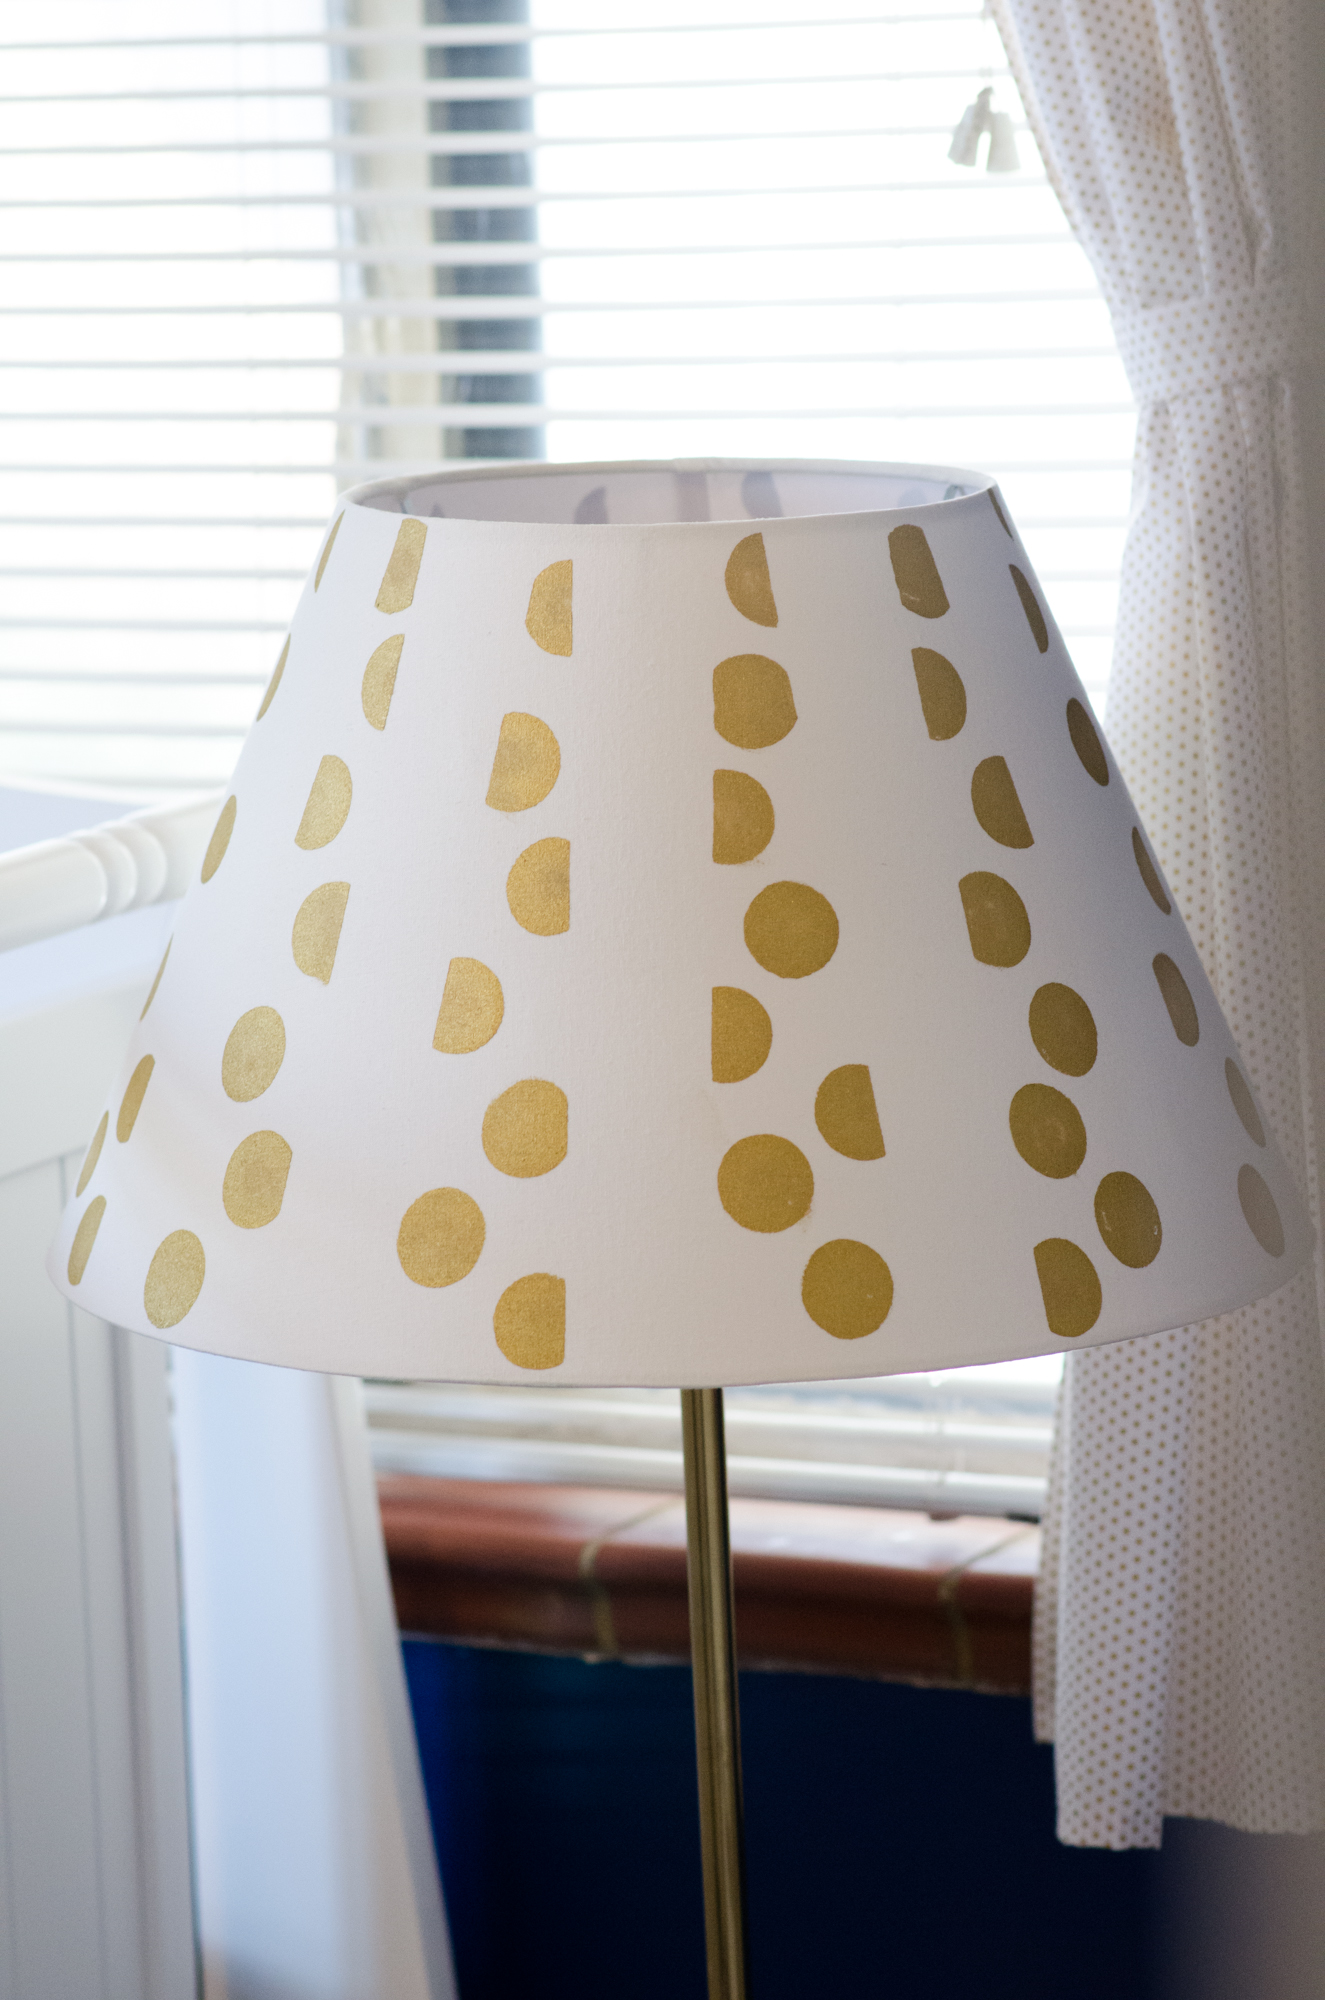 Lampshade Painted with Gold Acrylic Paint Using a Round Sponge